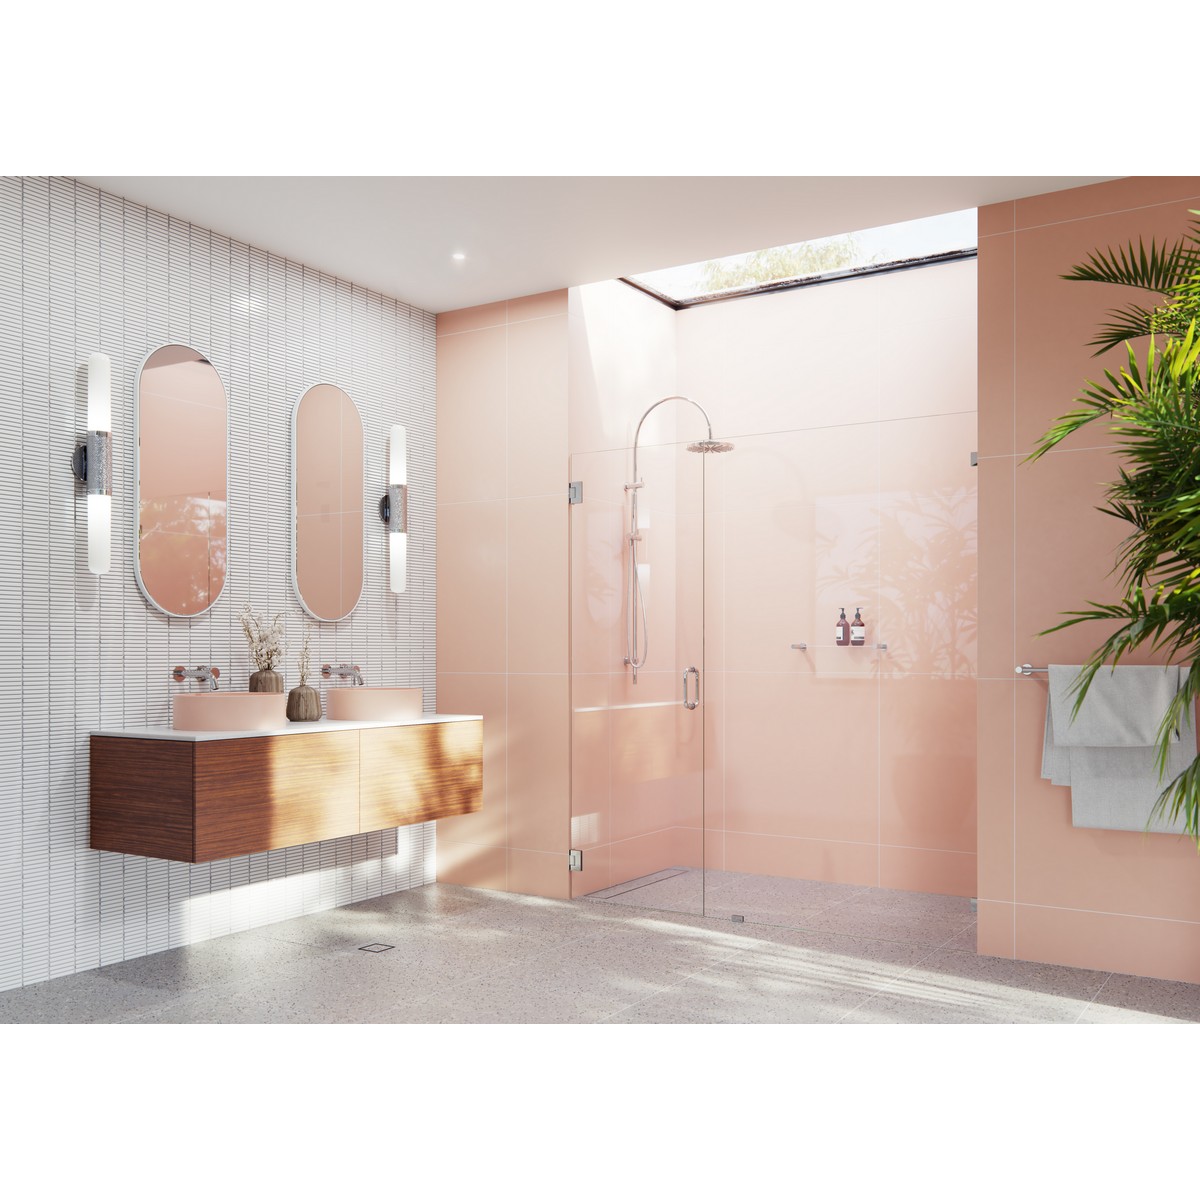 GLASS WAREHOUSE GW-WH-67 ILLUME 67 W X 78 H WALL HINGED FULLY FRAMELESS GLASS SHOWER ENCLOSURE